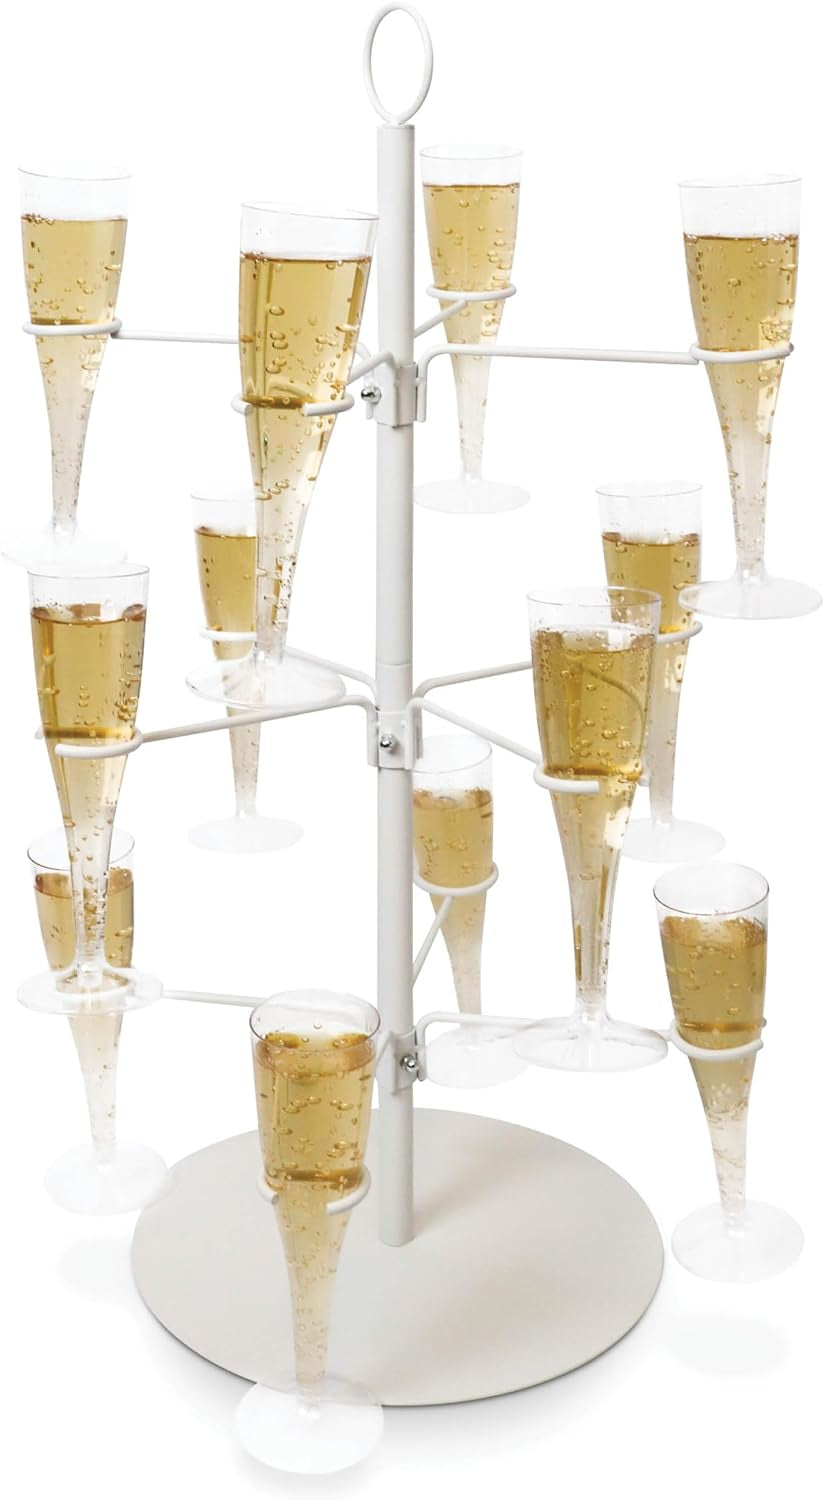  Cocktail Tree Stand, Wine Glass Flight Tasting Display For  Drinks, 3 Tier - 12 Holders For Champagne, Cocktails, Martini, Margarita  Cups at Weddings, Bridal Shower, Mimosa Bar Parties & Events (Black) 